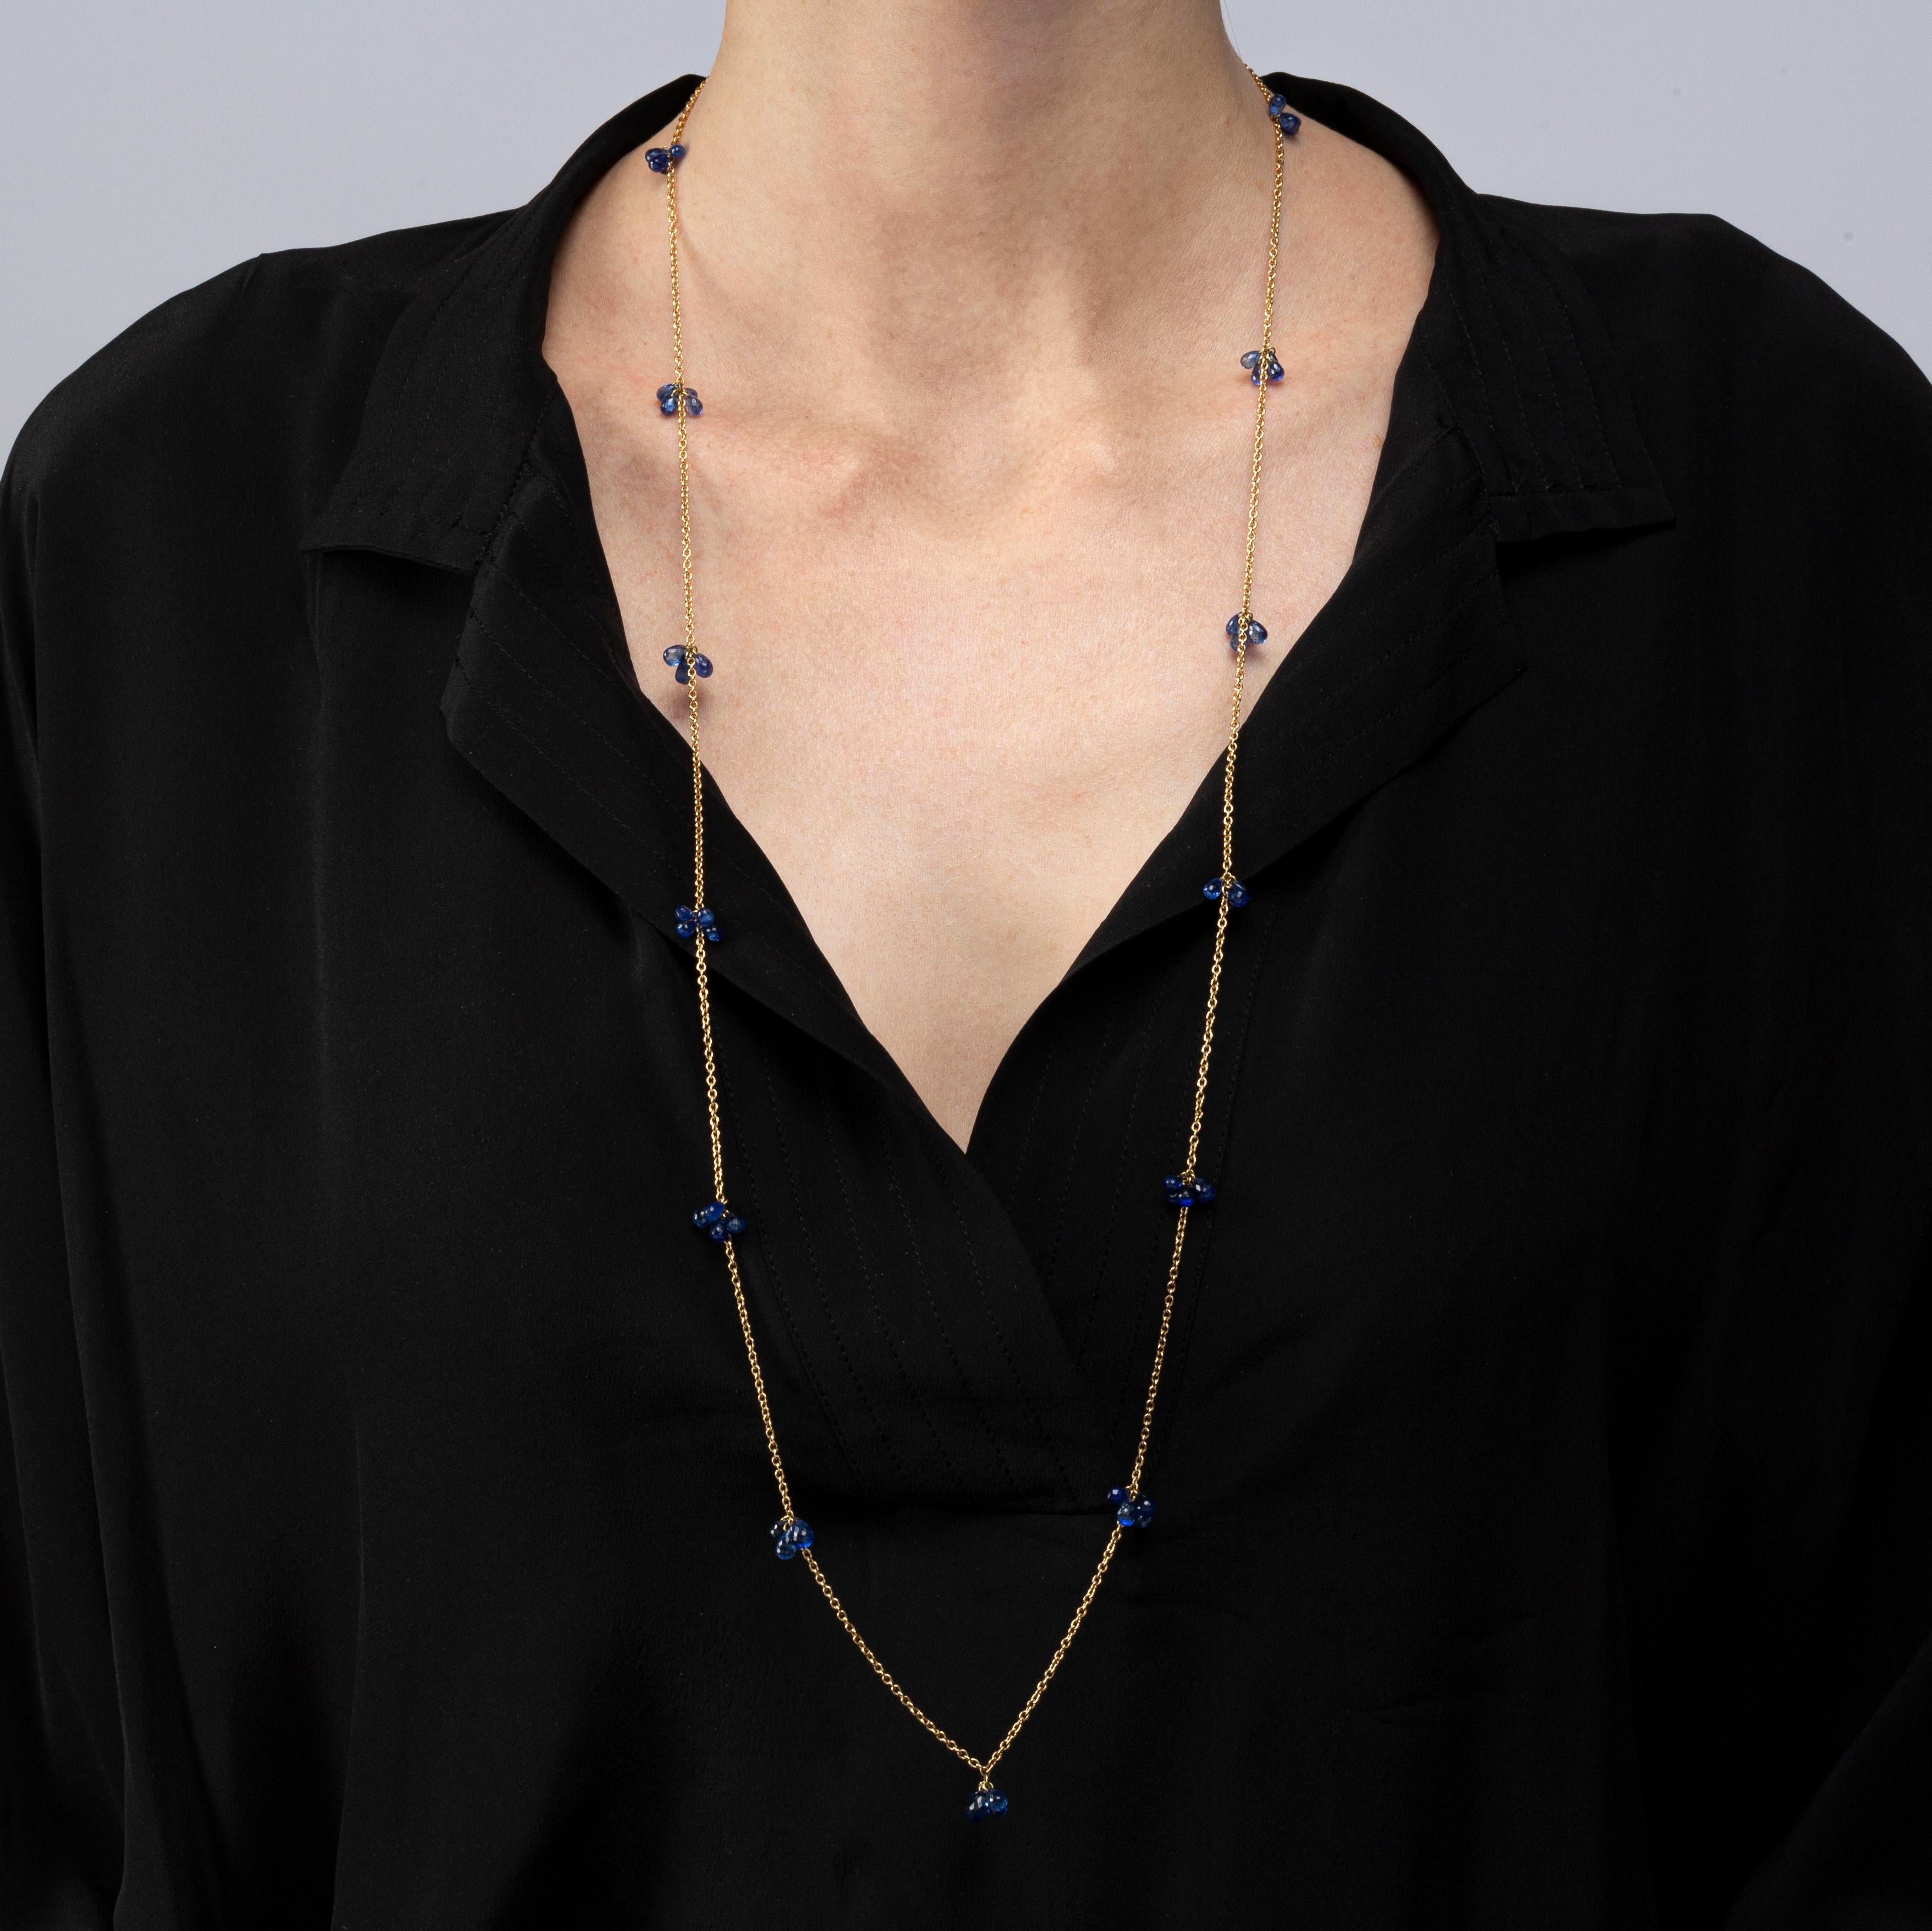 Alex Jona design collection, hand crafted in Italy, 18 karat yellow gold sautoir long chain necklace, 35.43in.- 90 cm. long, with 40.10 carats of blue sapphire briolette drops.

Alex Jona jewels stand out, not only for their special design and for